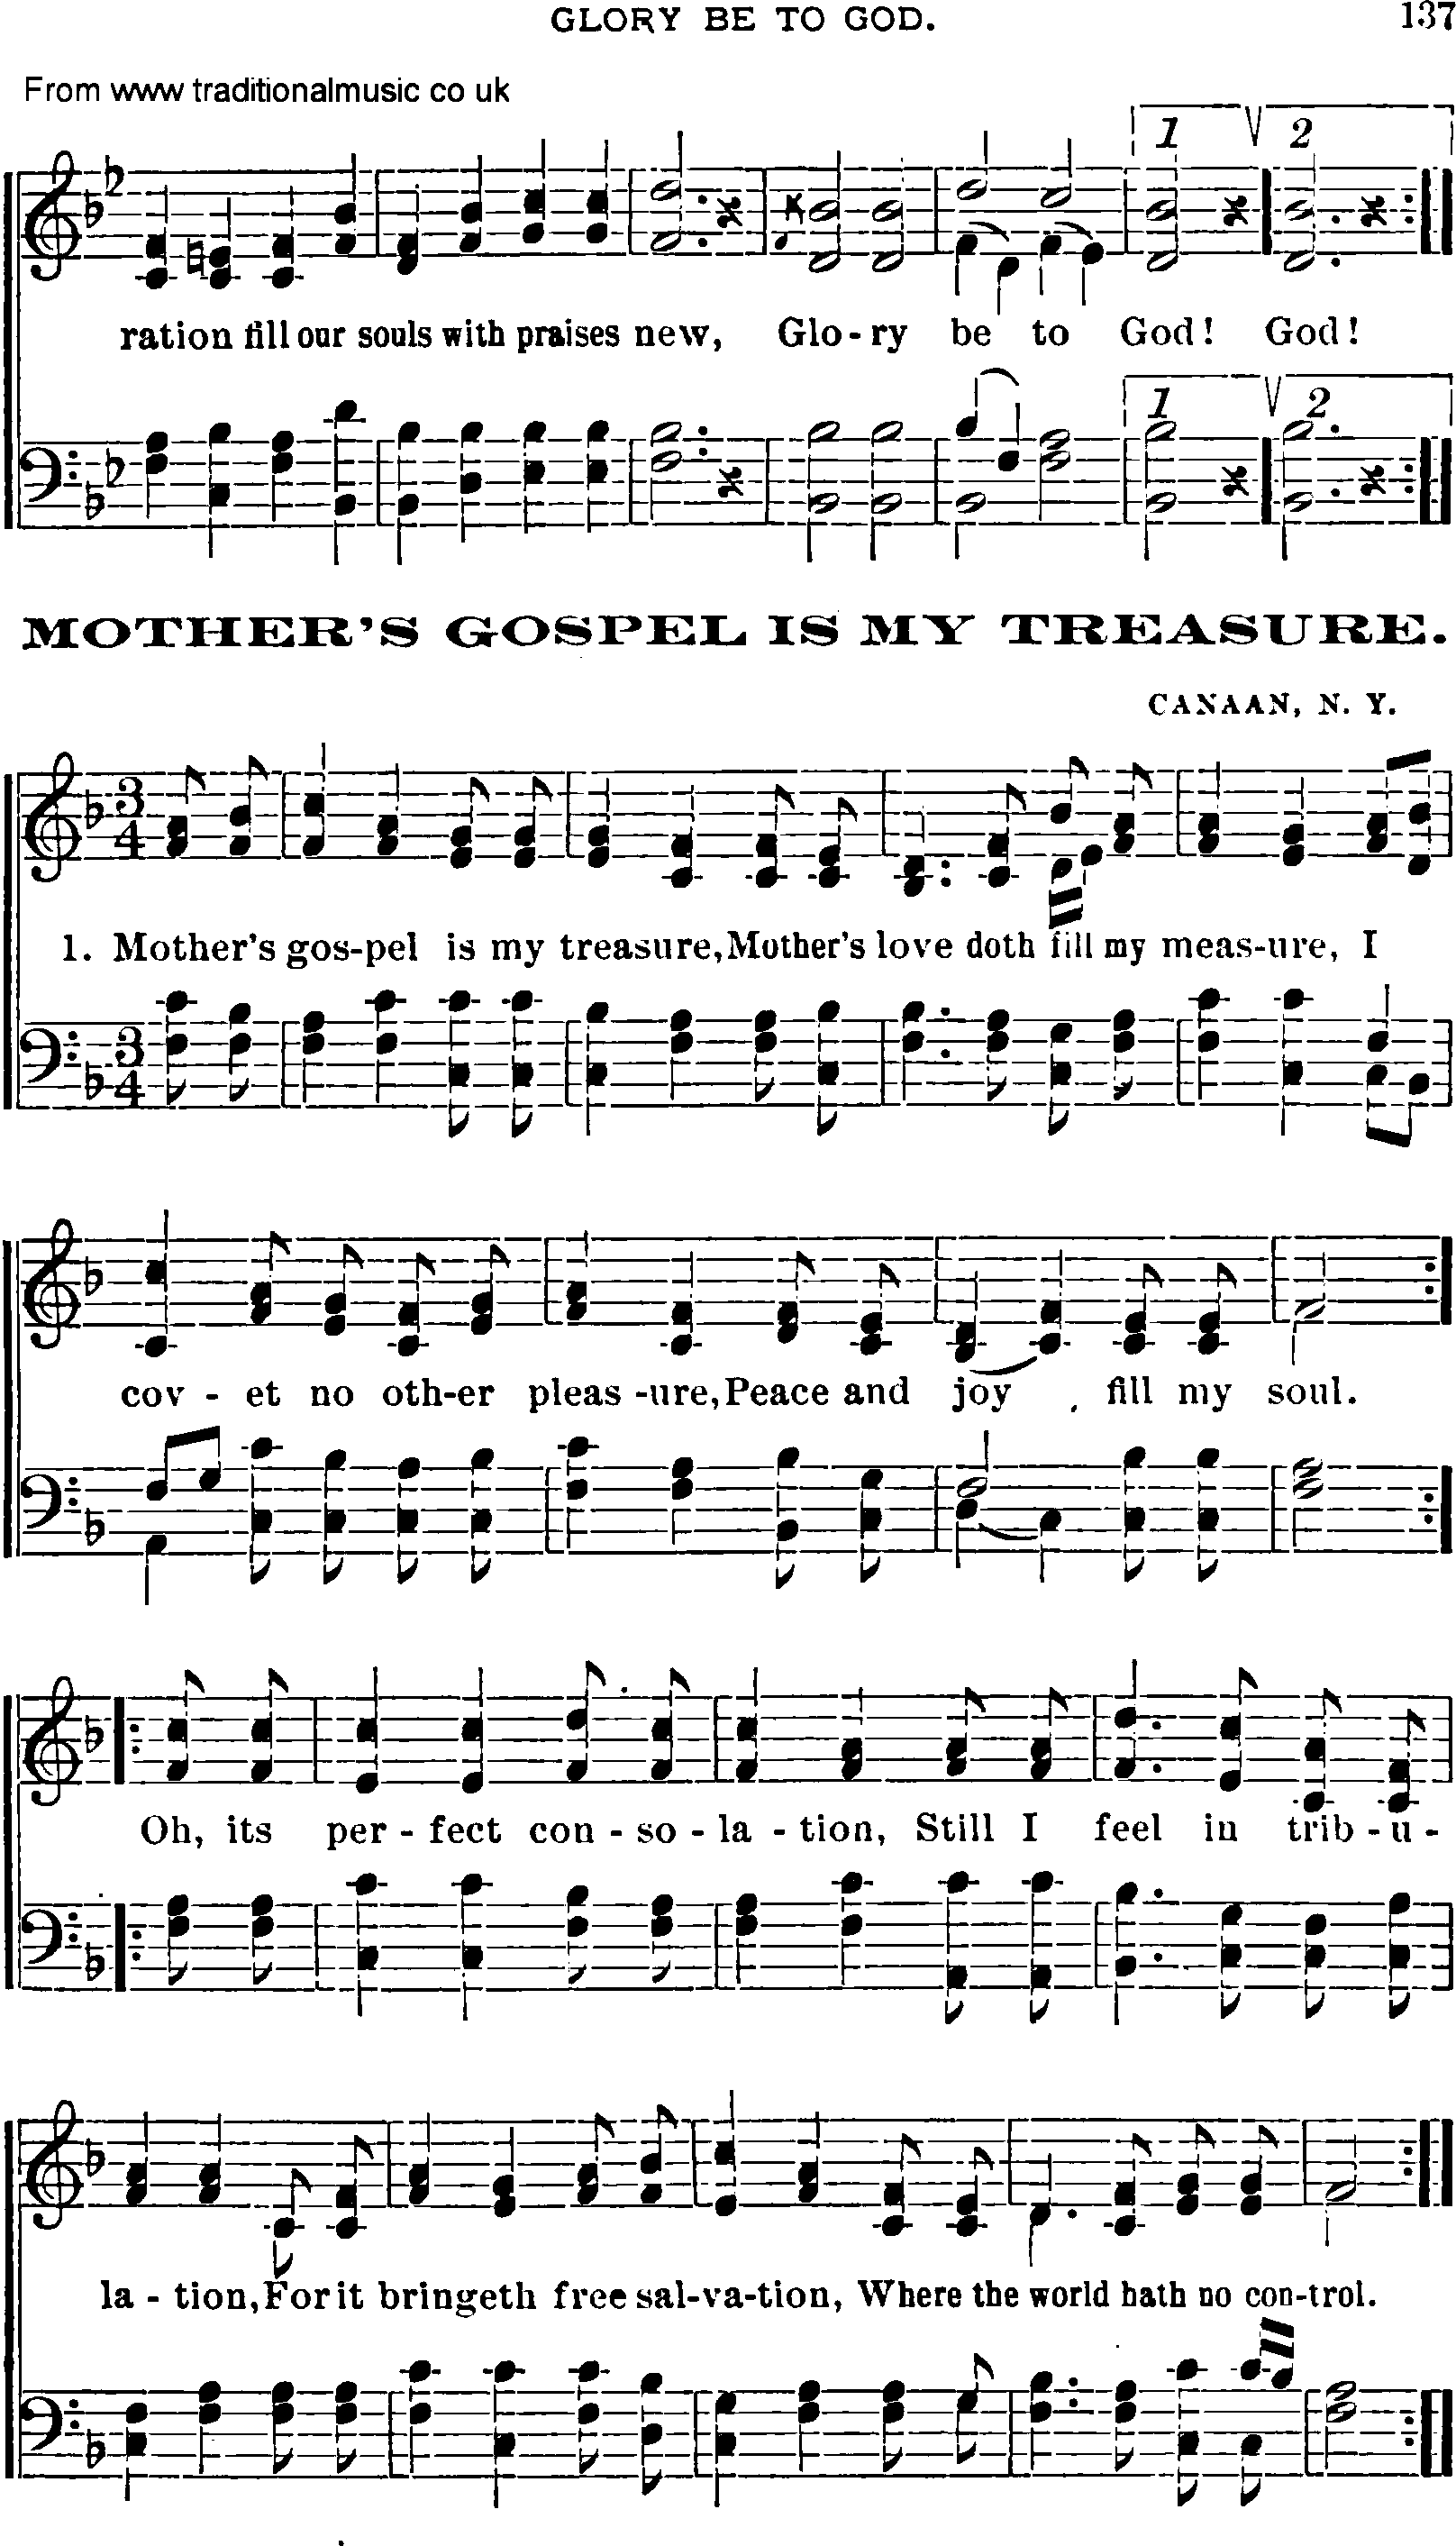 Shaker Music collection, Hymn: mothers gospel is my treasure, sheetmusic and PDF